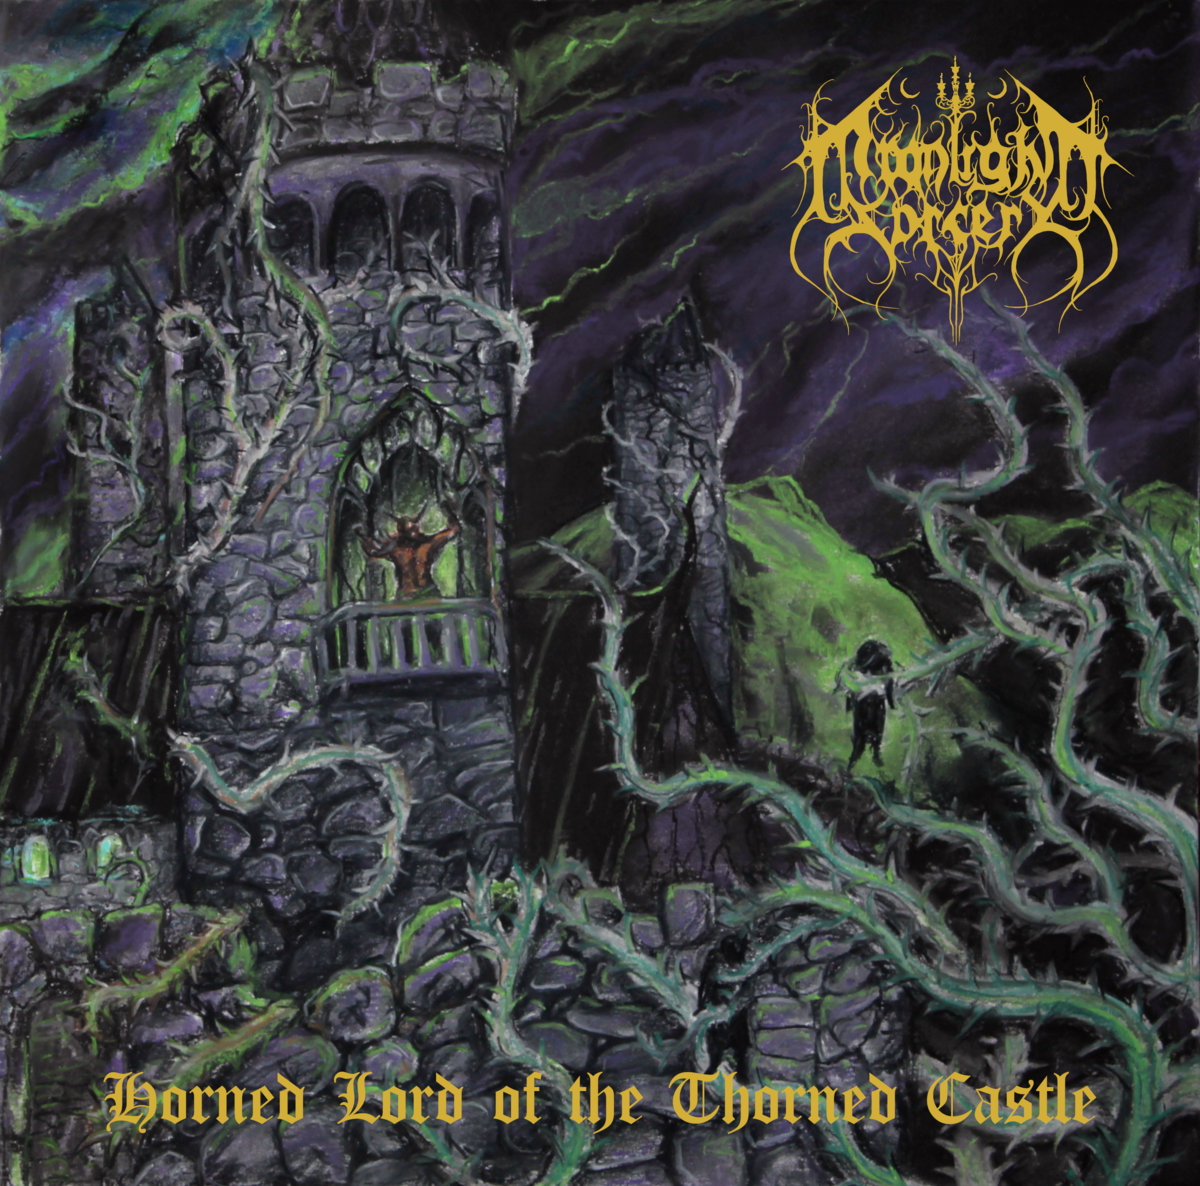 Moonlight Sorcery - Horned Lord of the Thorned Castle Review | Angry Metal  Guy